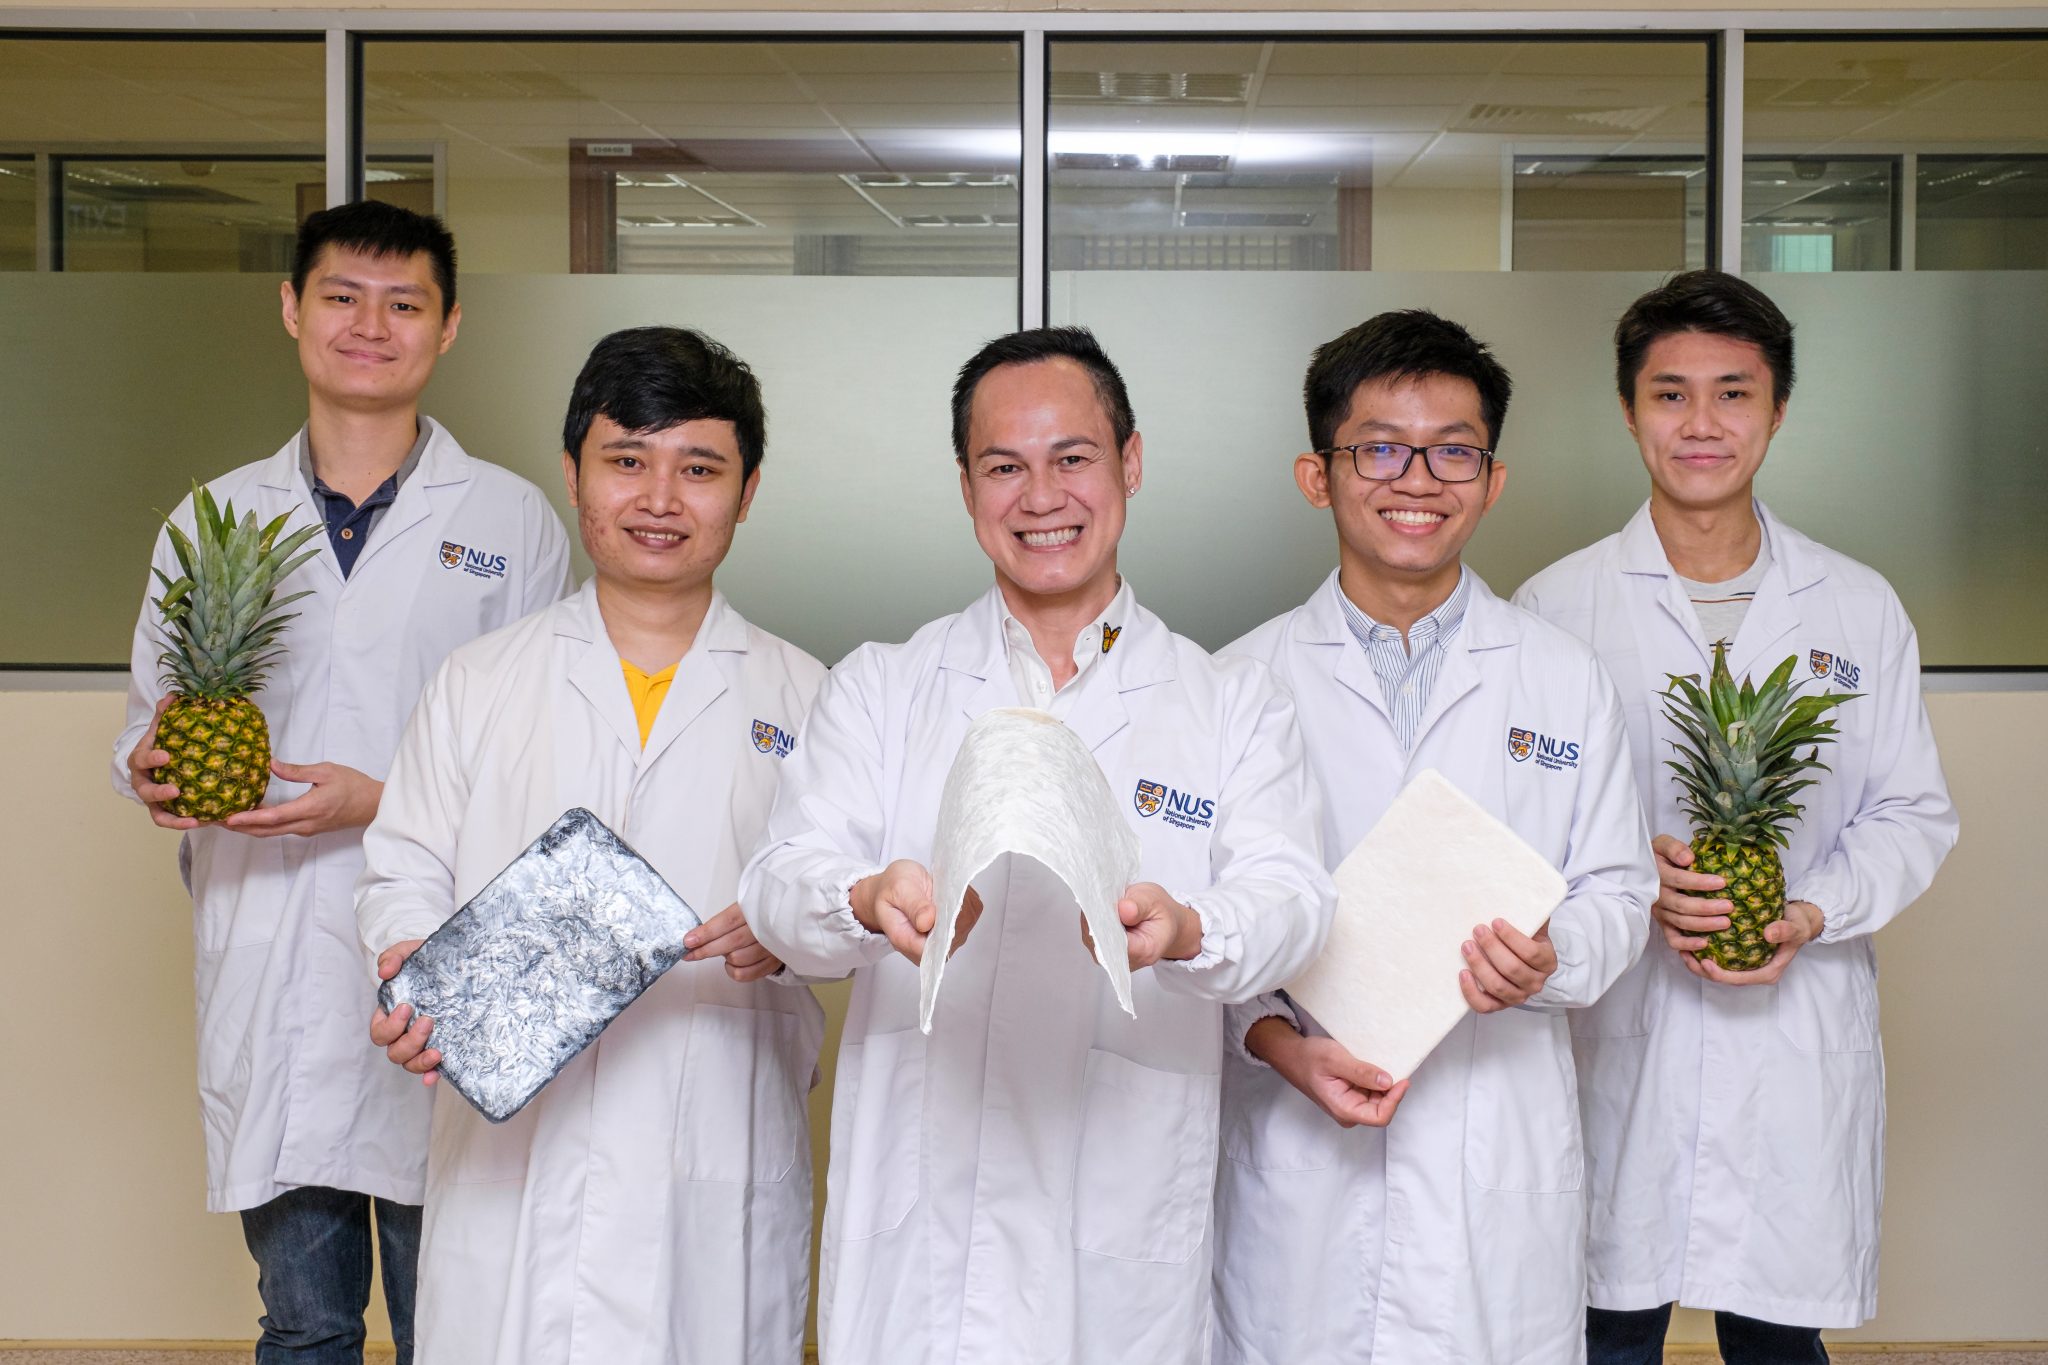 Researchers led by Associate Professor Duong Hai-Minh (centre) from NUS Department of Mechanical Engineering